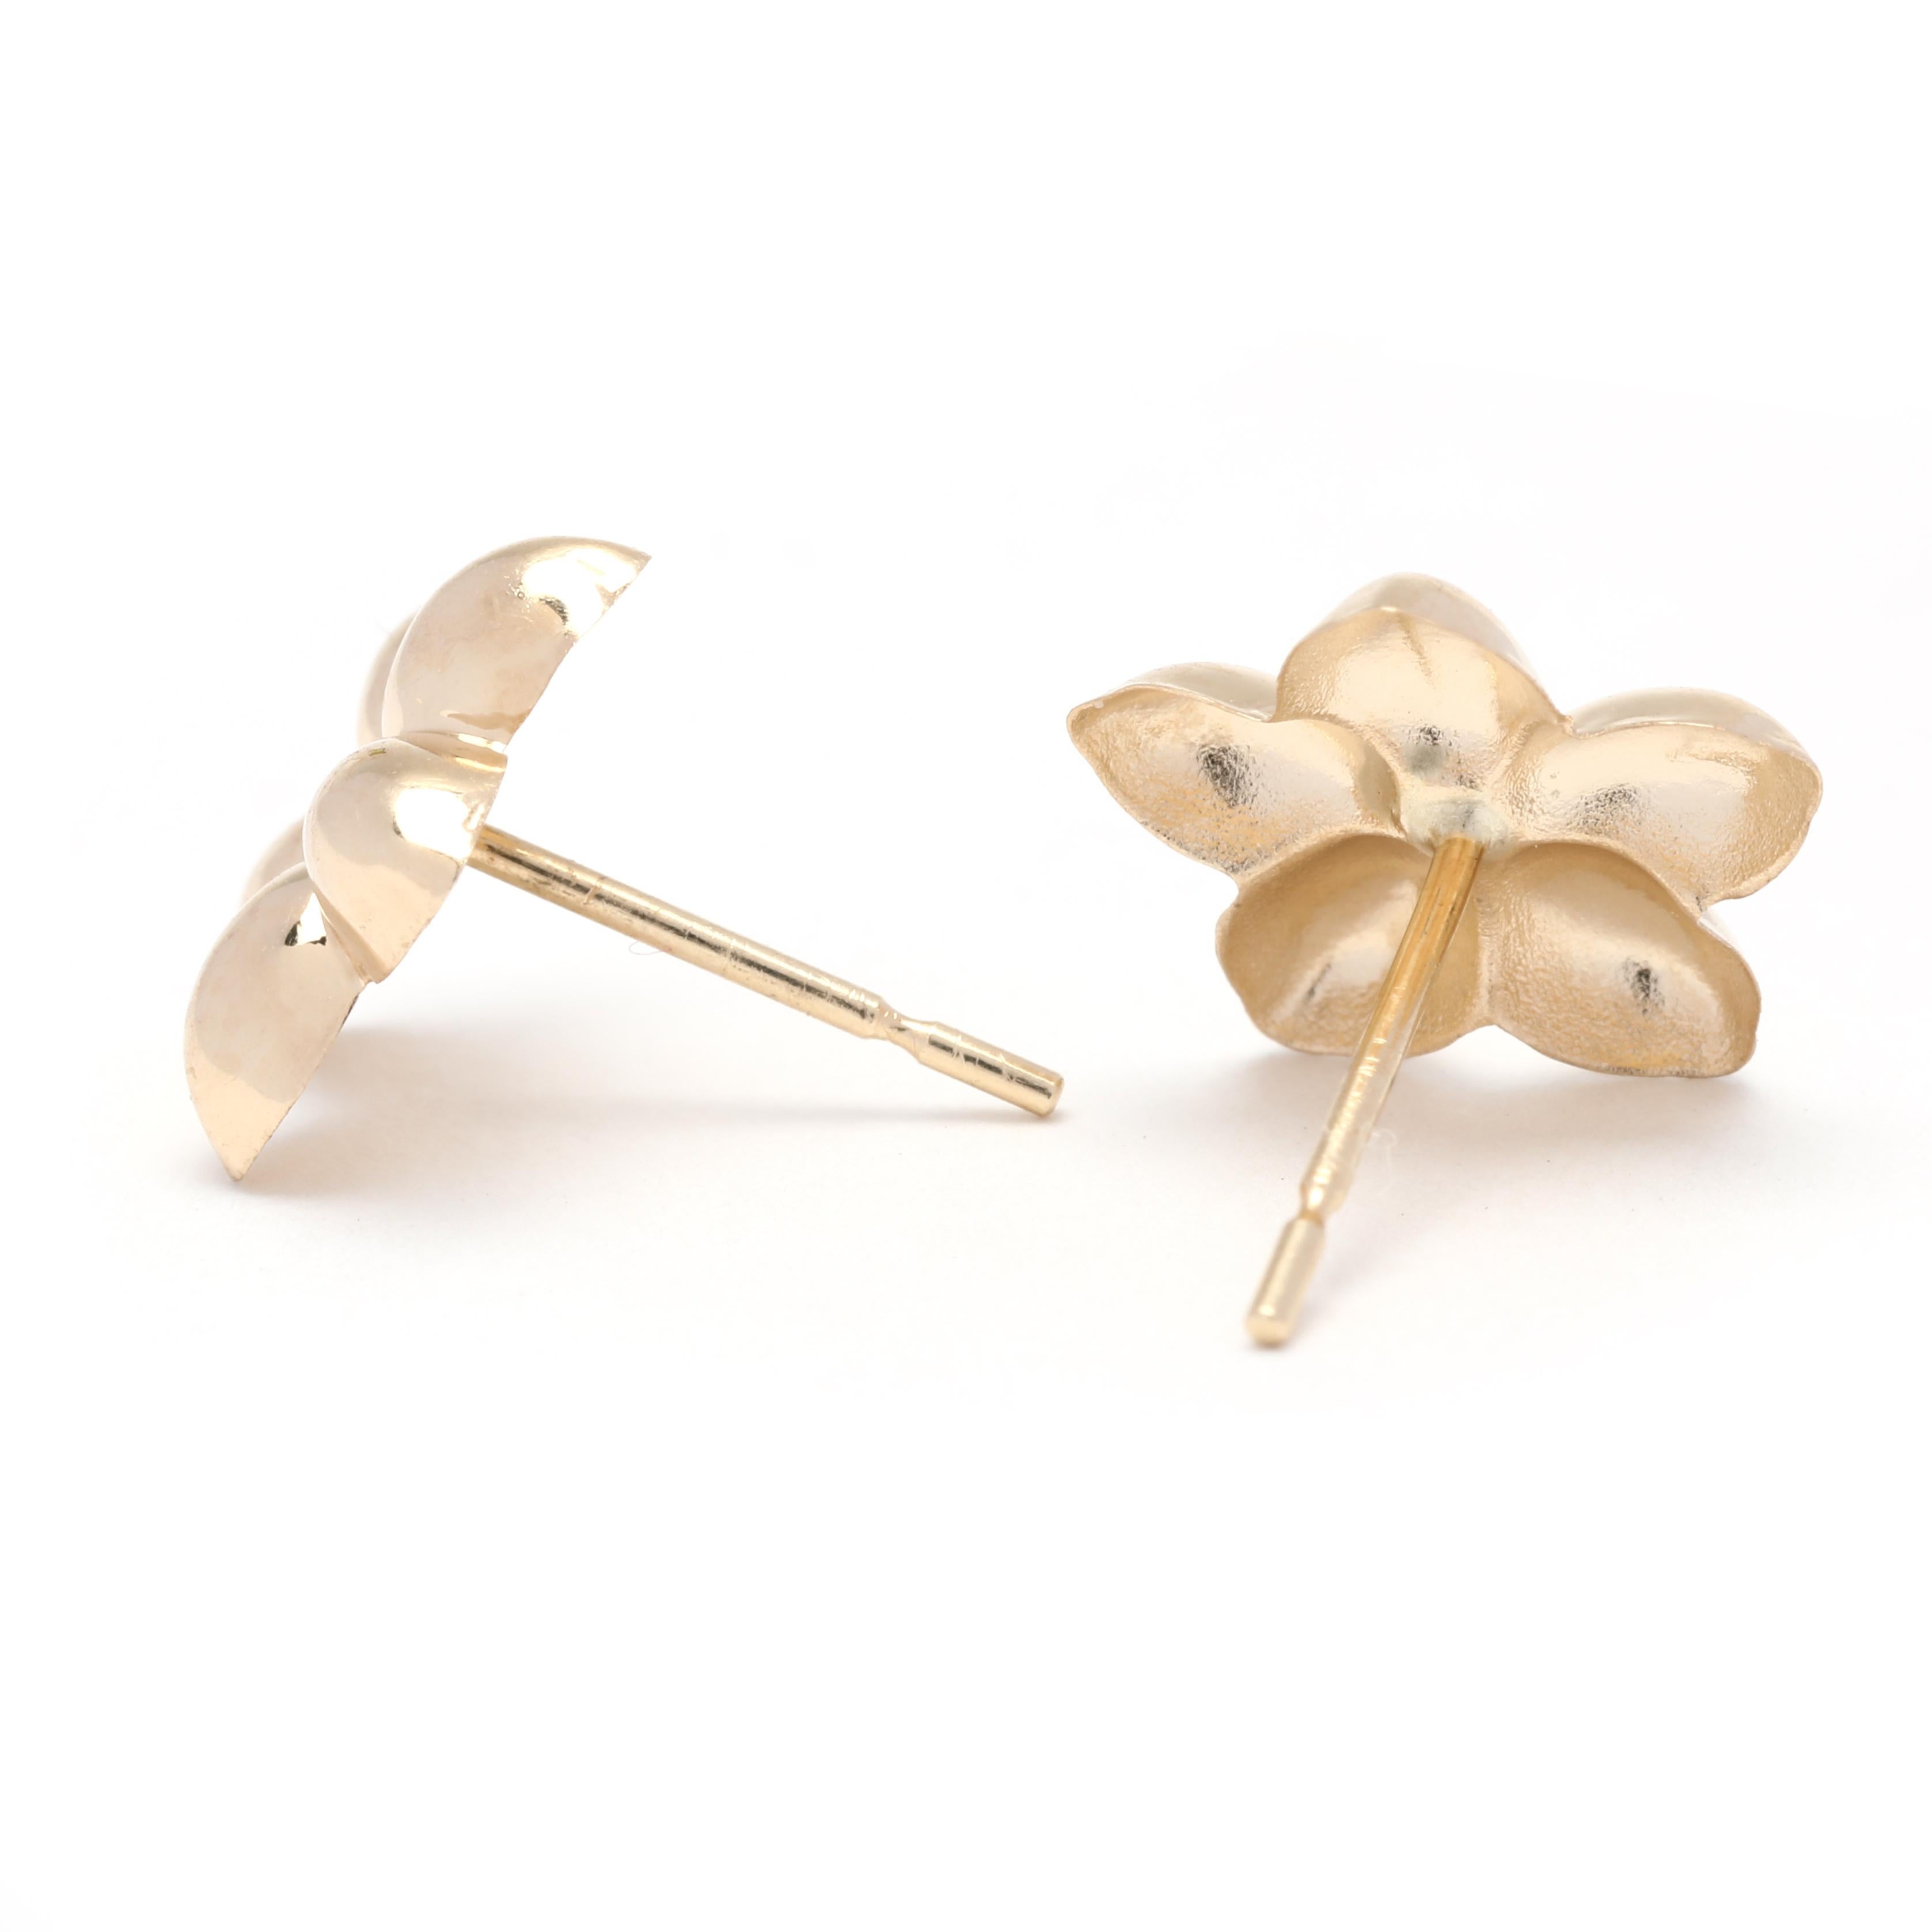 These beautiful 14K yellow gold flower stud earrings are perfect for everyday wear. The petite size is perfect for the minimalist look, while the light weight ensures comfortable wear. These simple yet elegant stud earrings measure 3/8 inches in